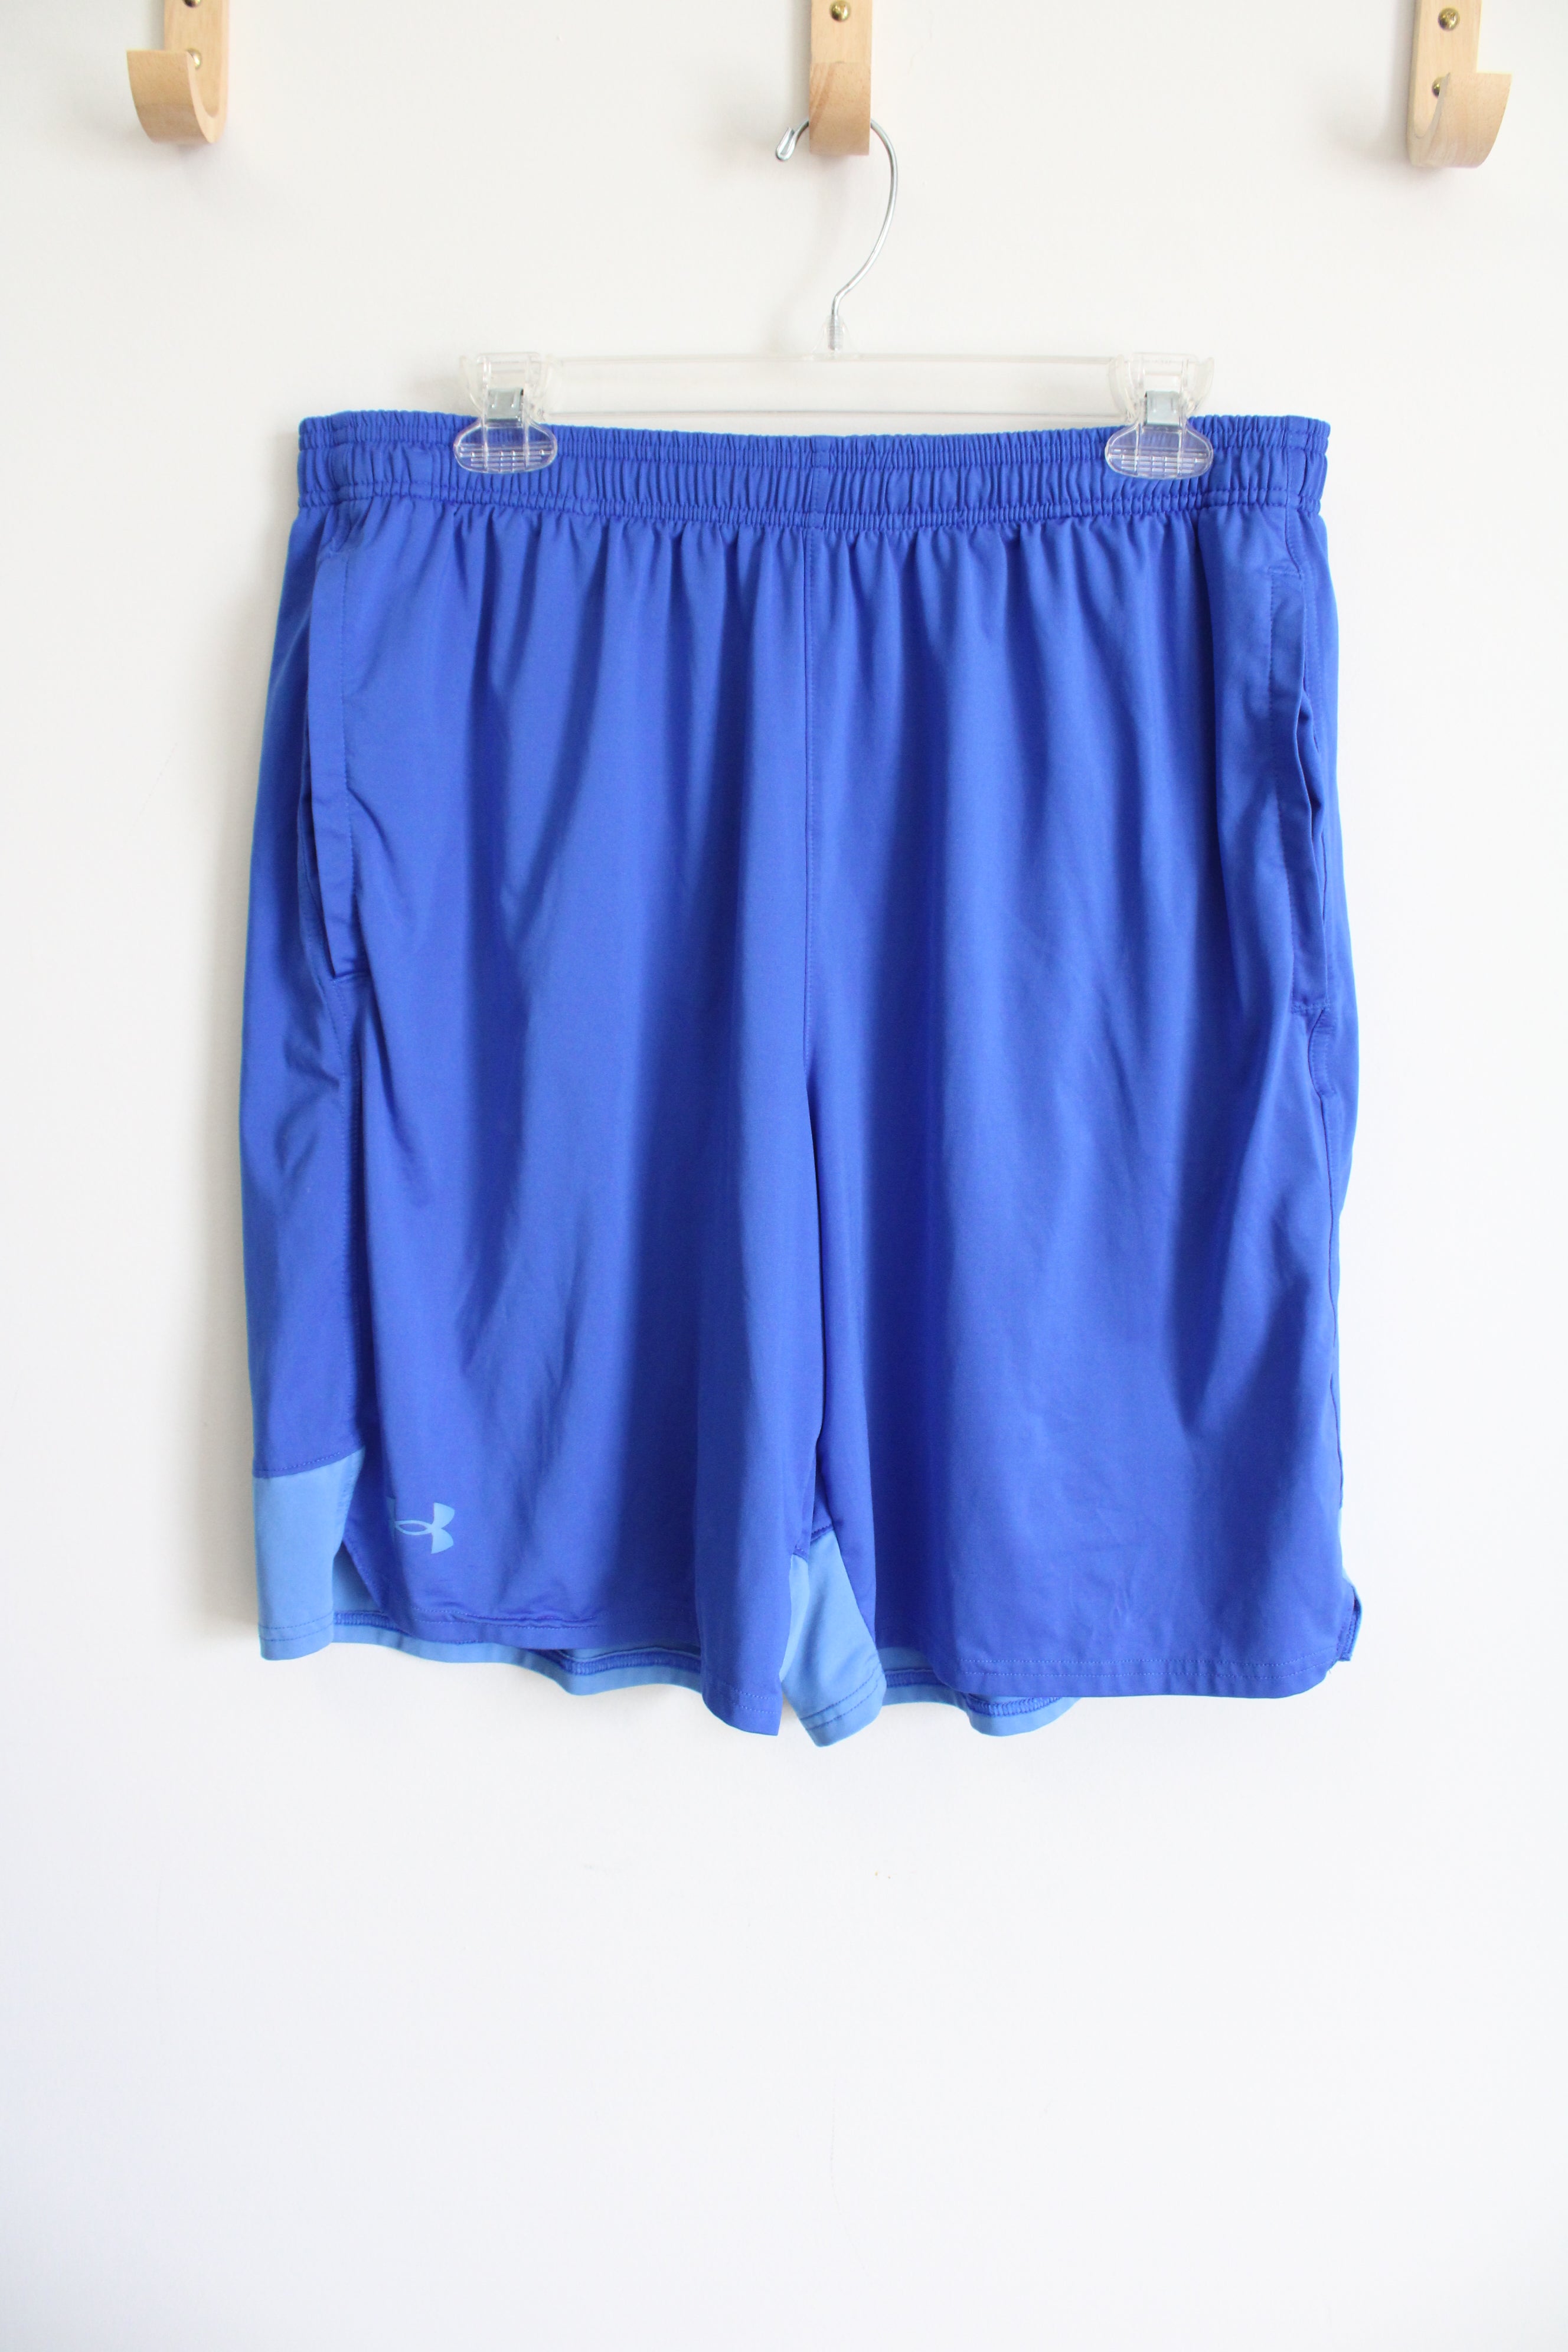 Under Armour Loose Blue Athletic Shorts | XL